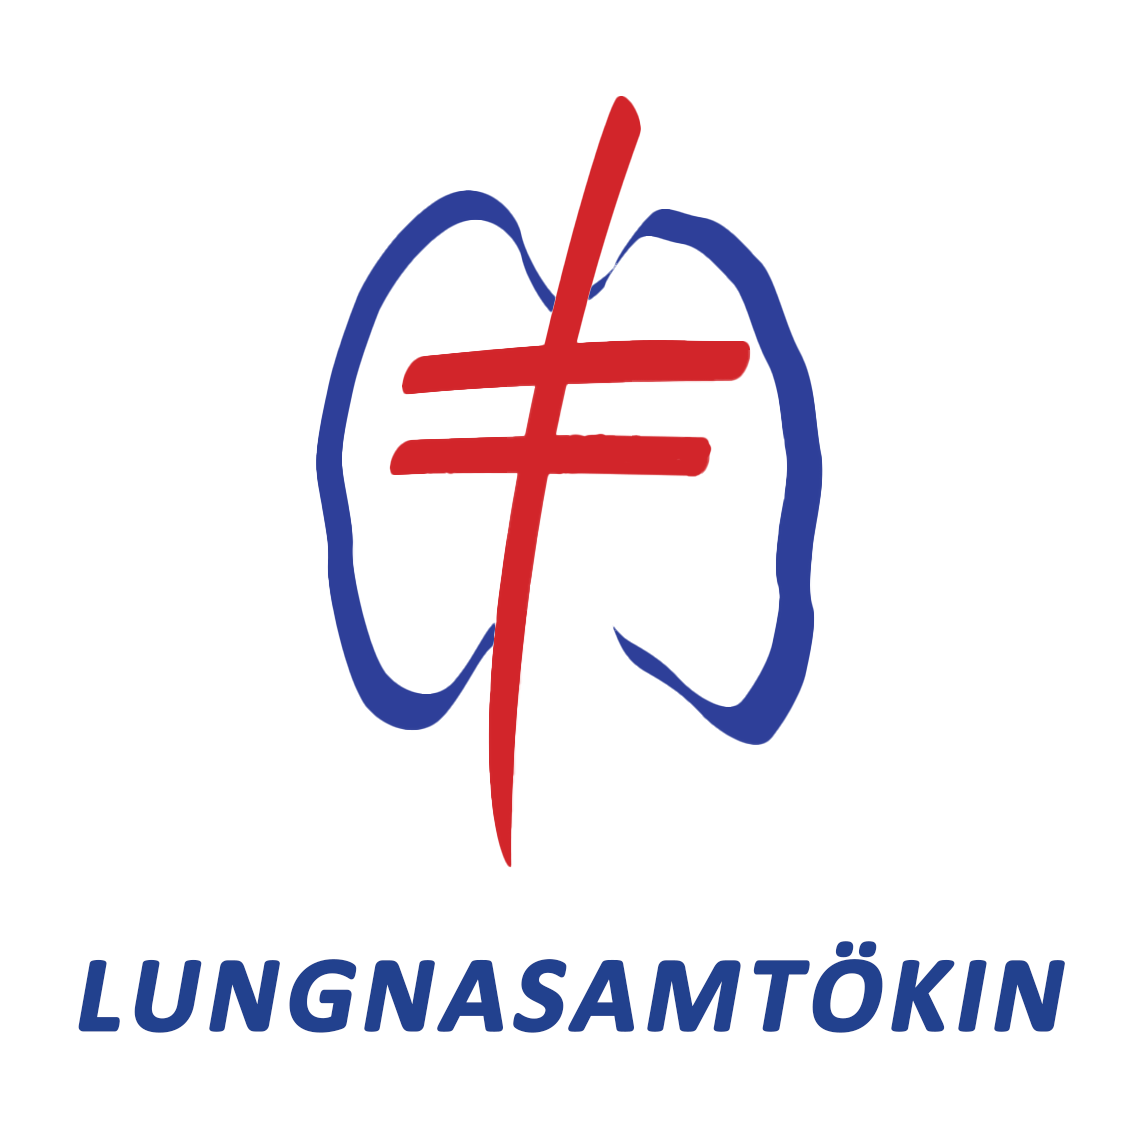 The Icelandic Lung Association